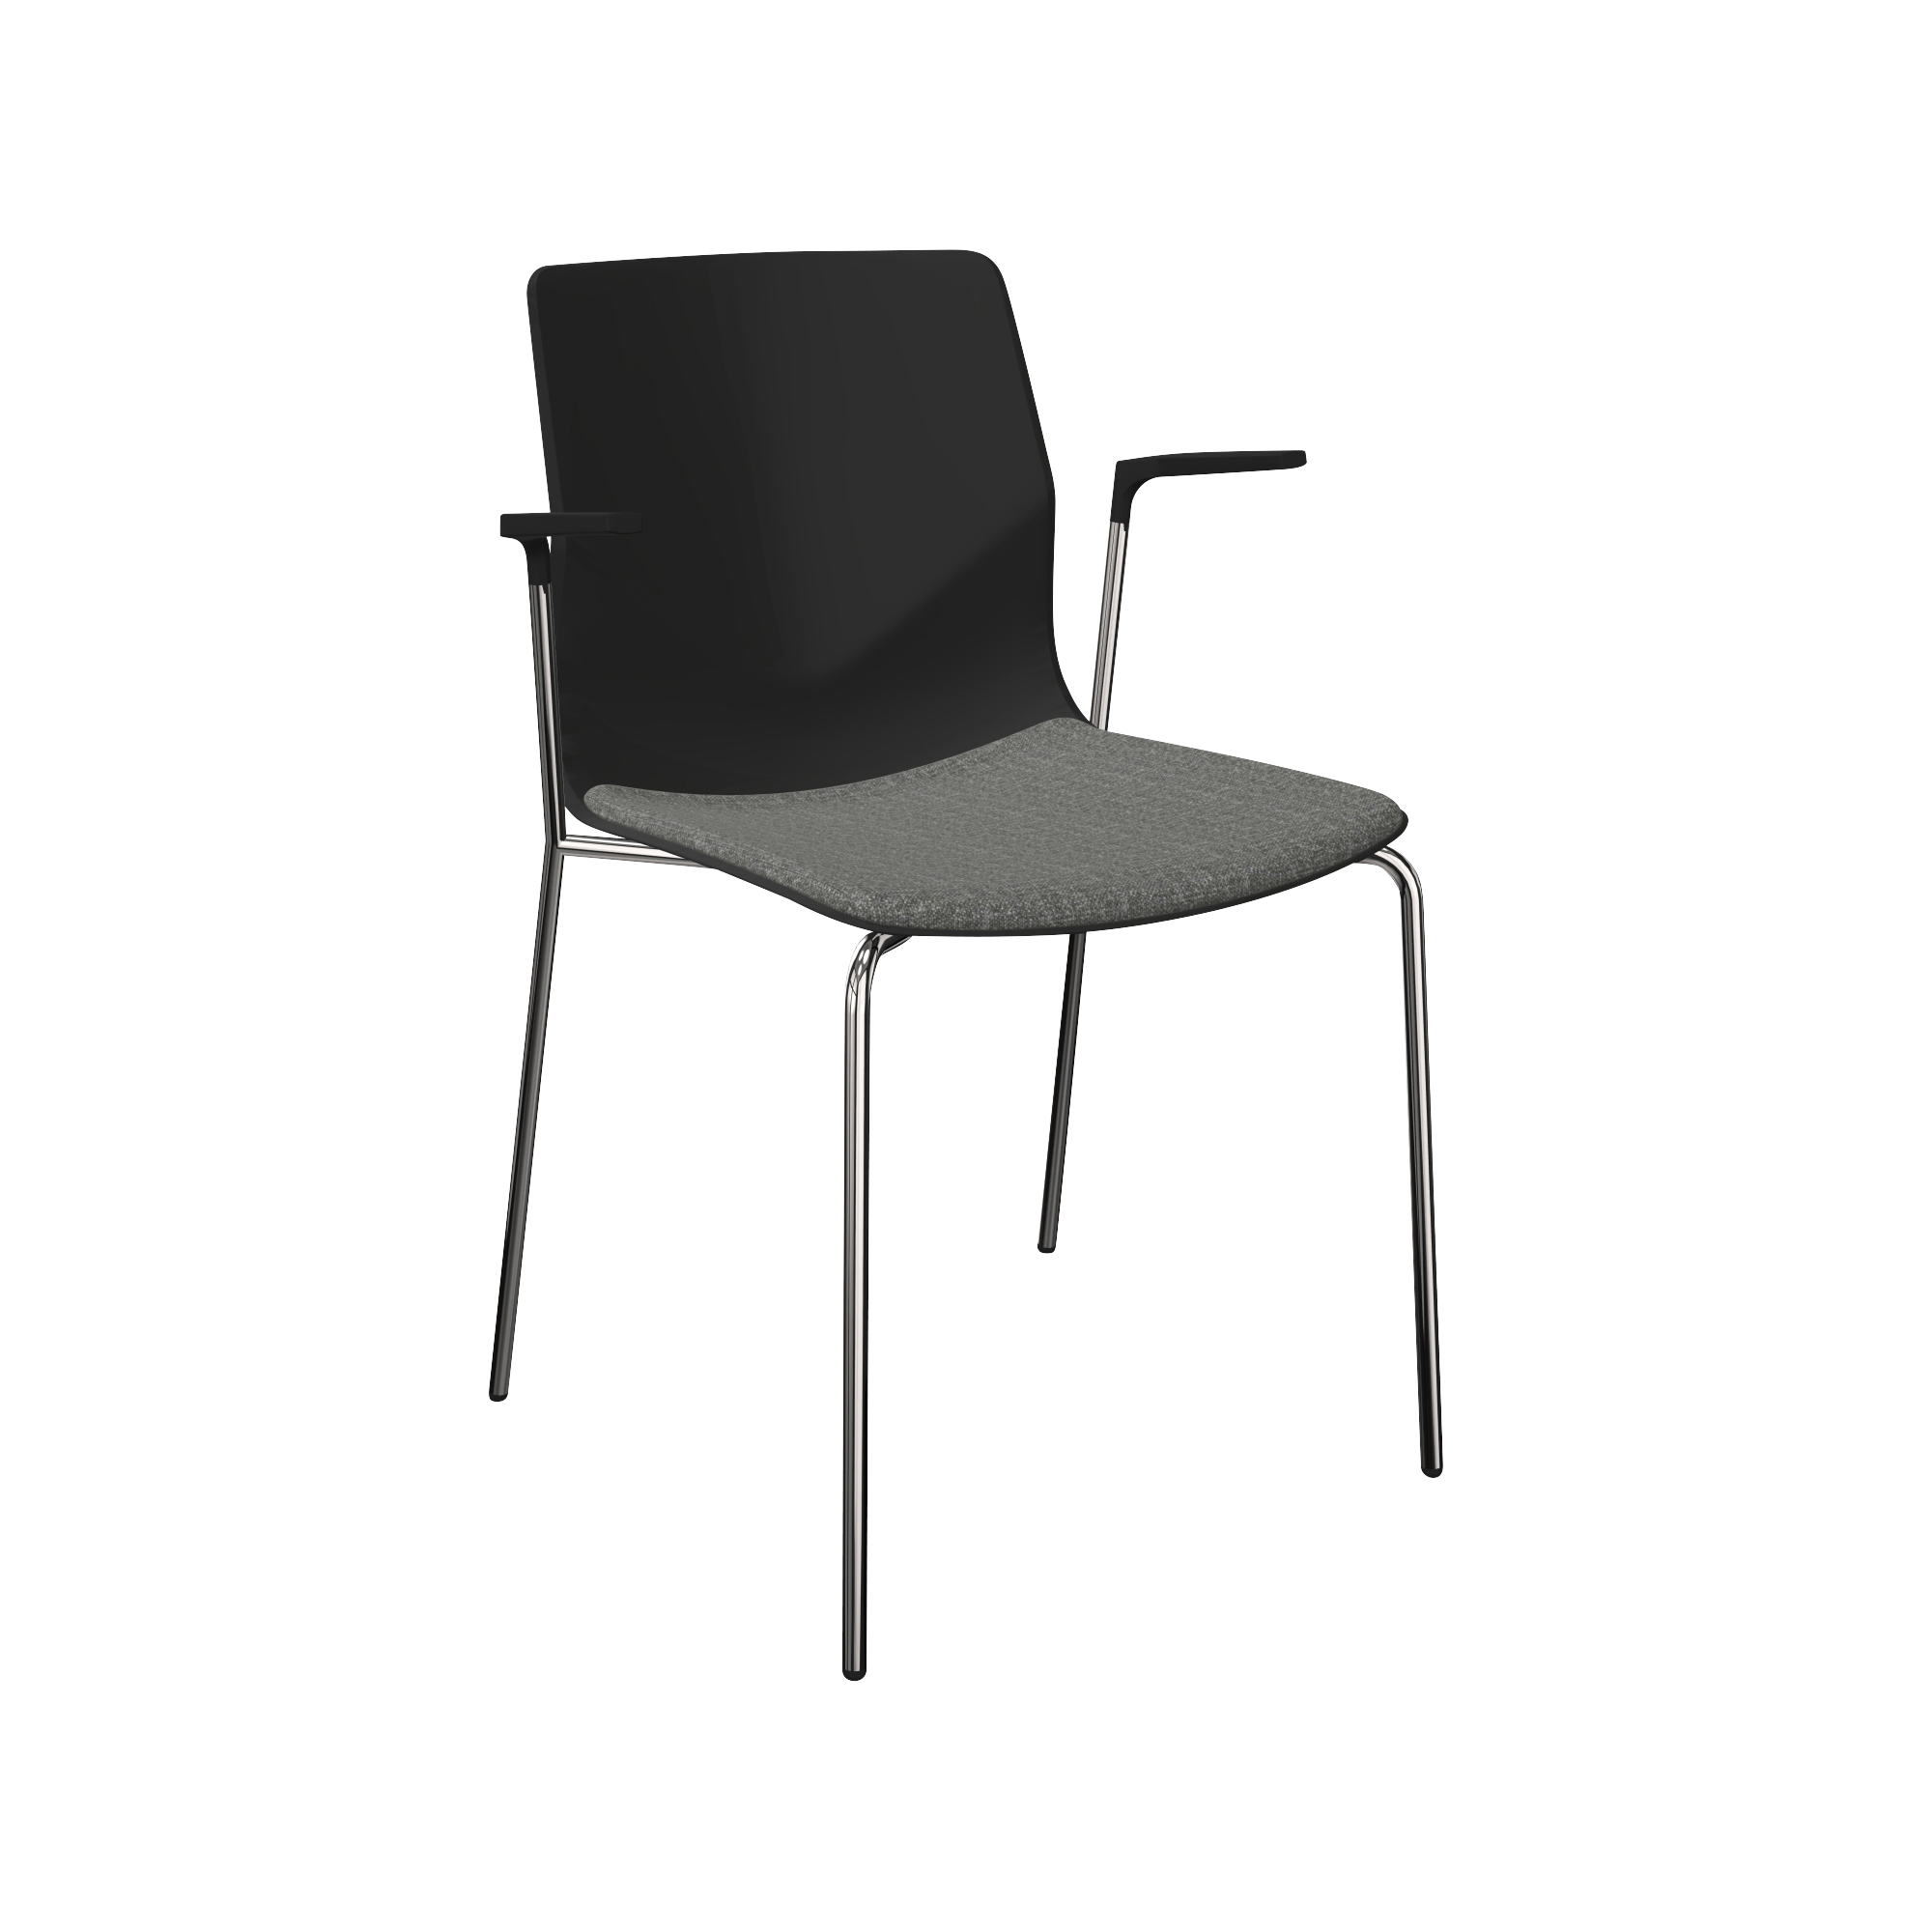 A grey chair with a chrome frame and legs